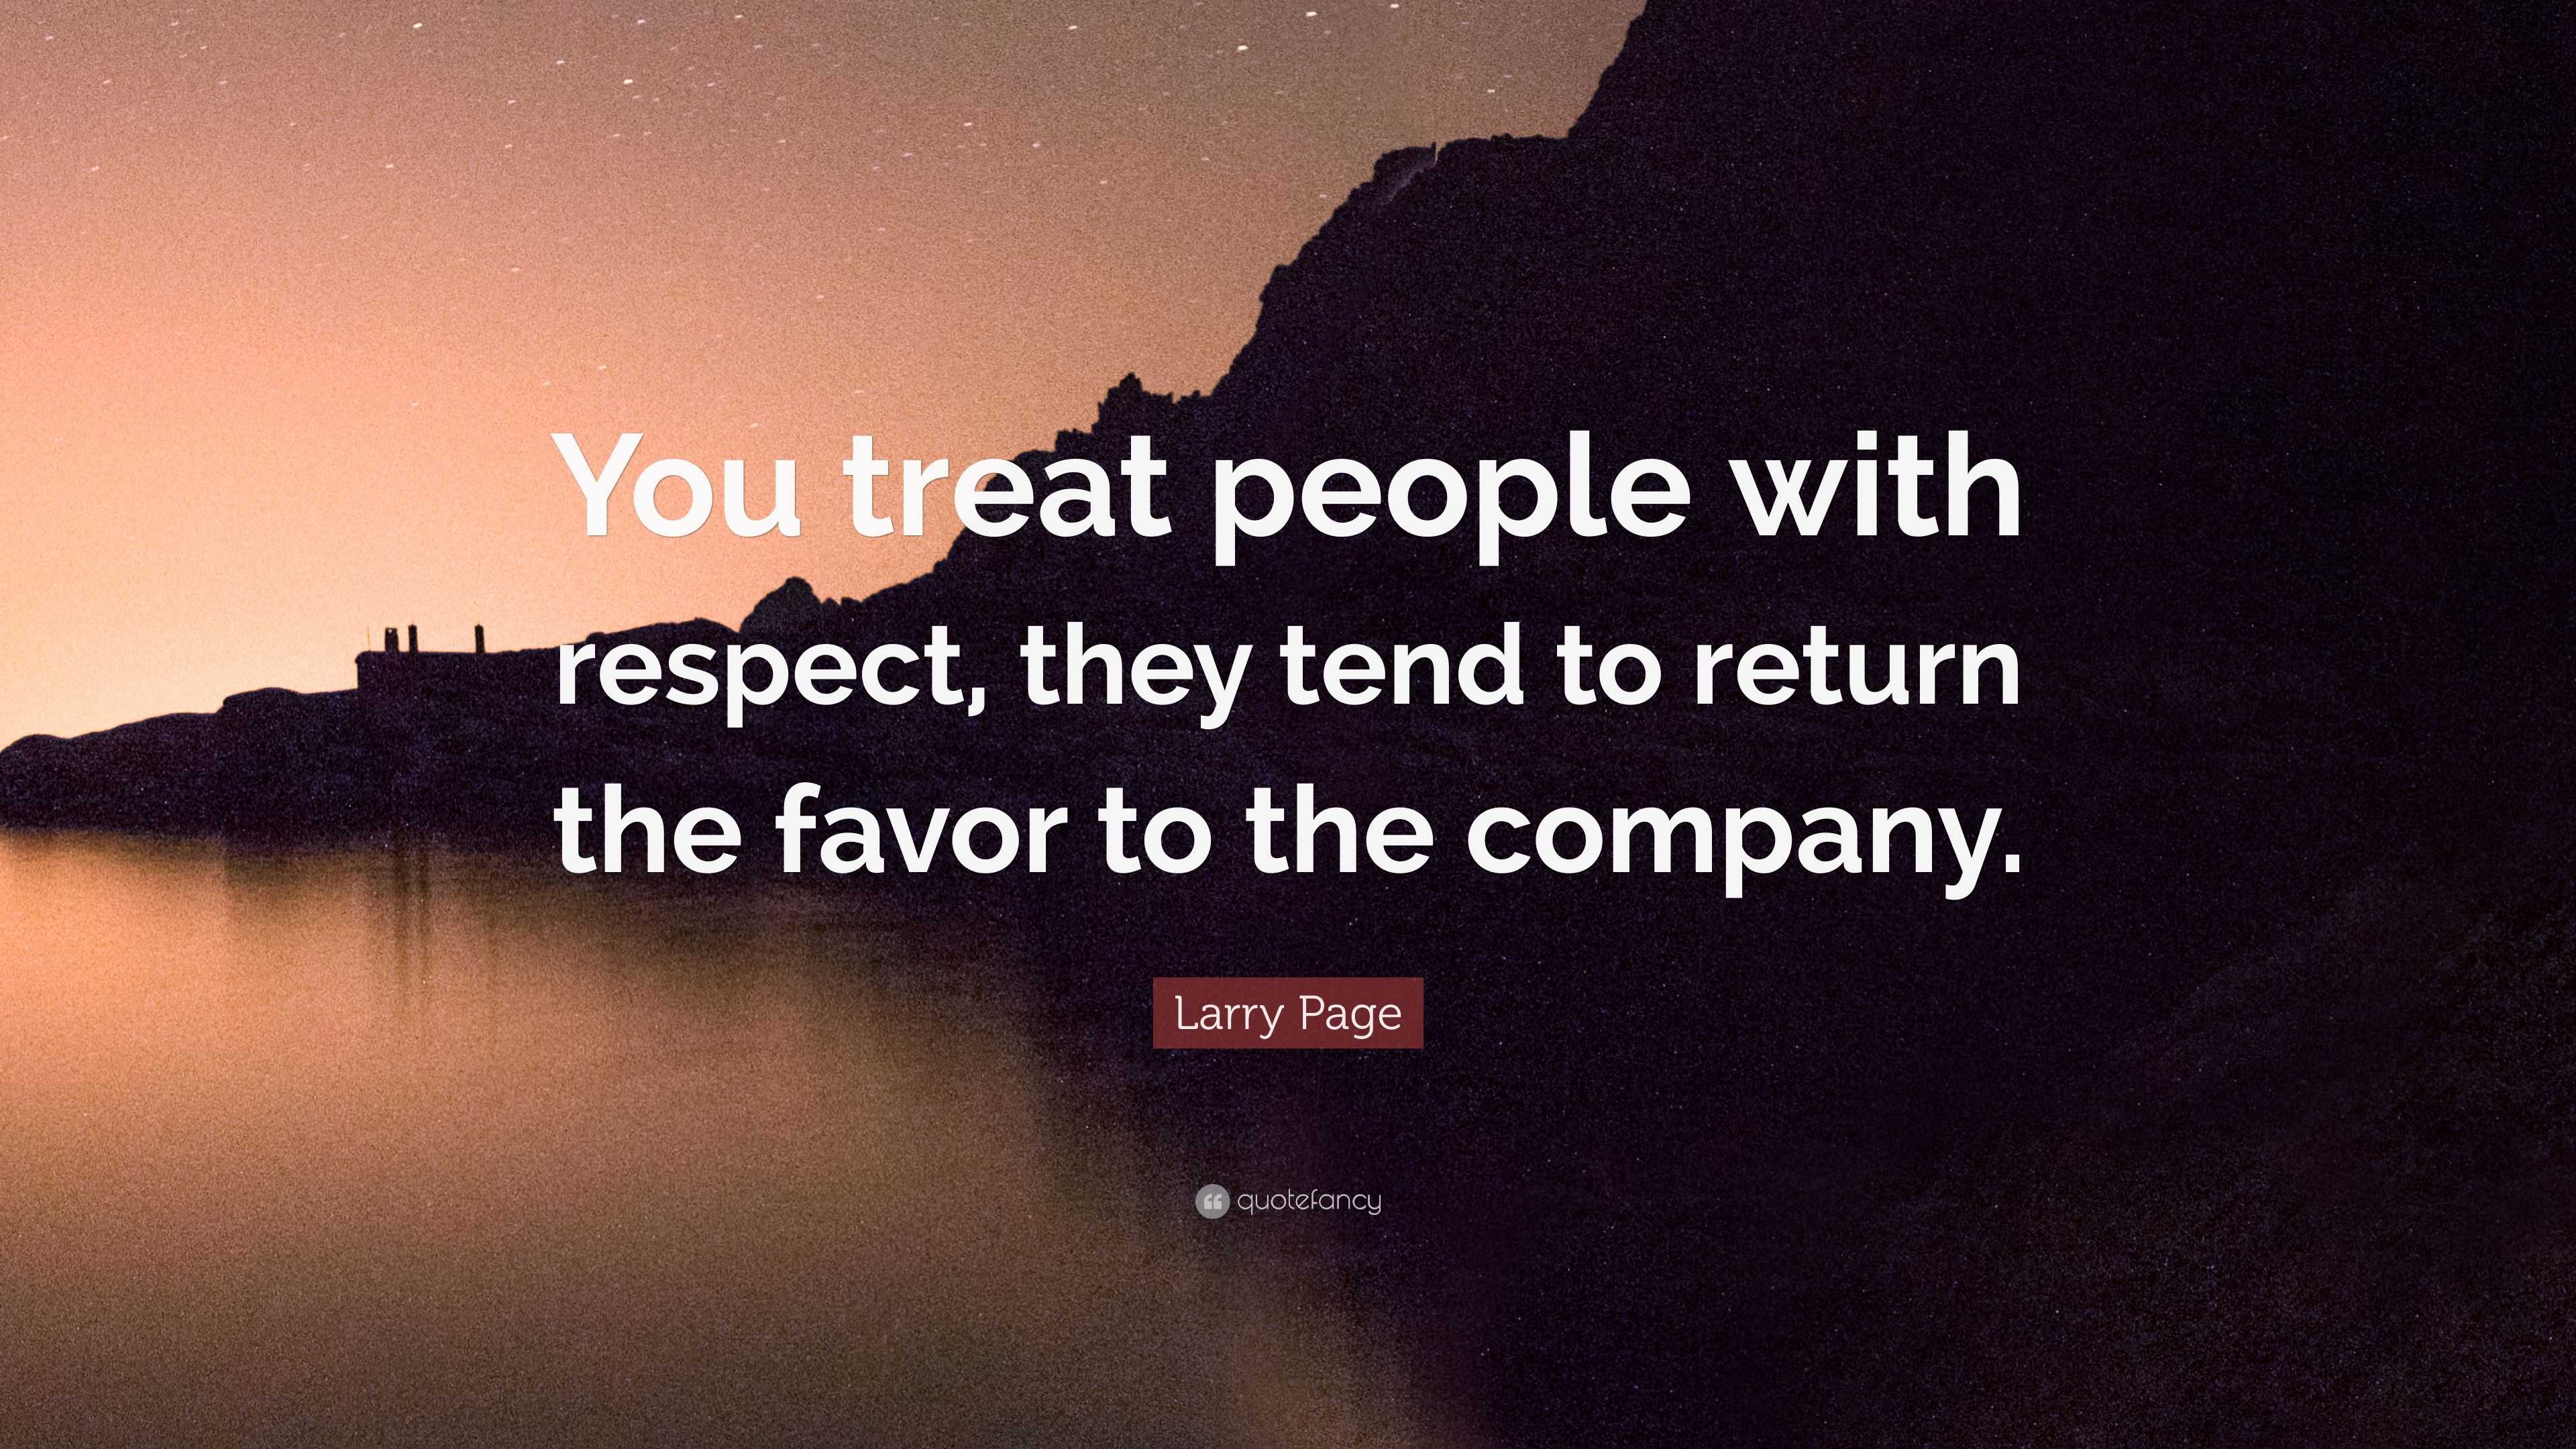 Larry Page Quote: “You treat people with respect, they tend to return